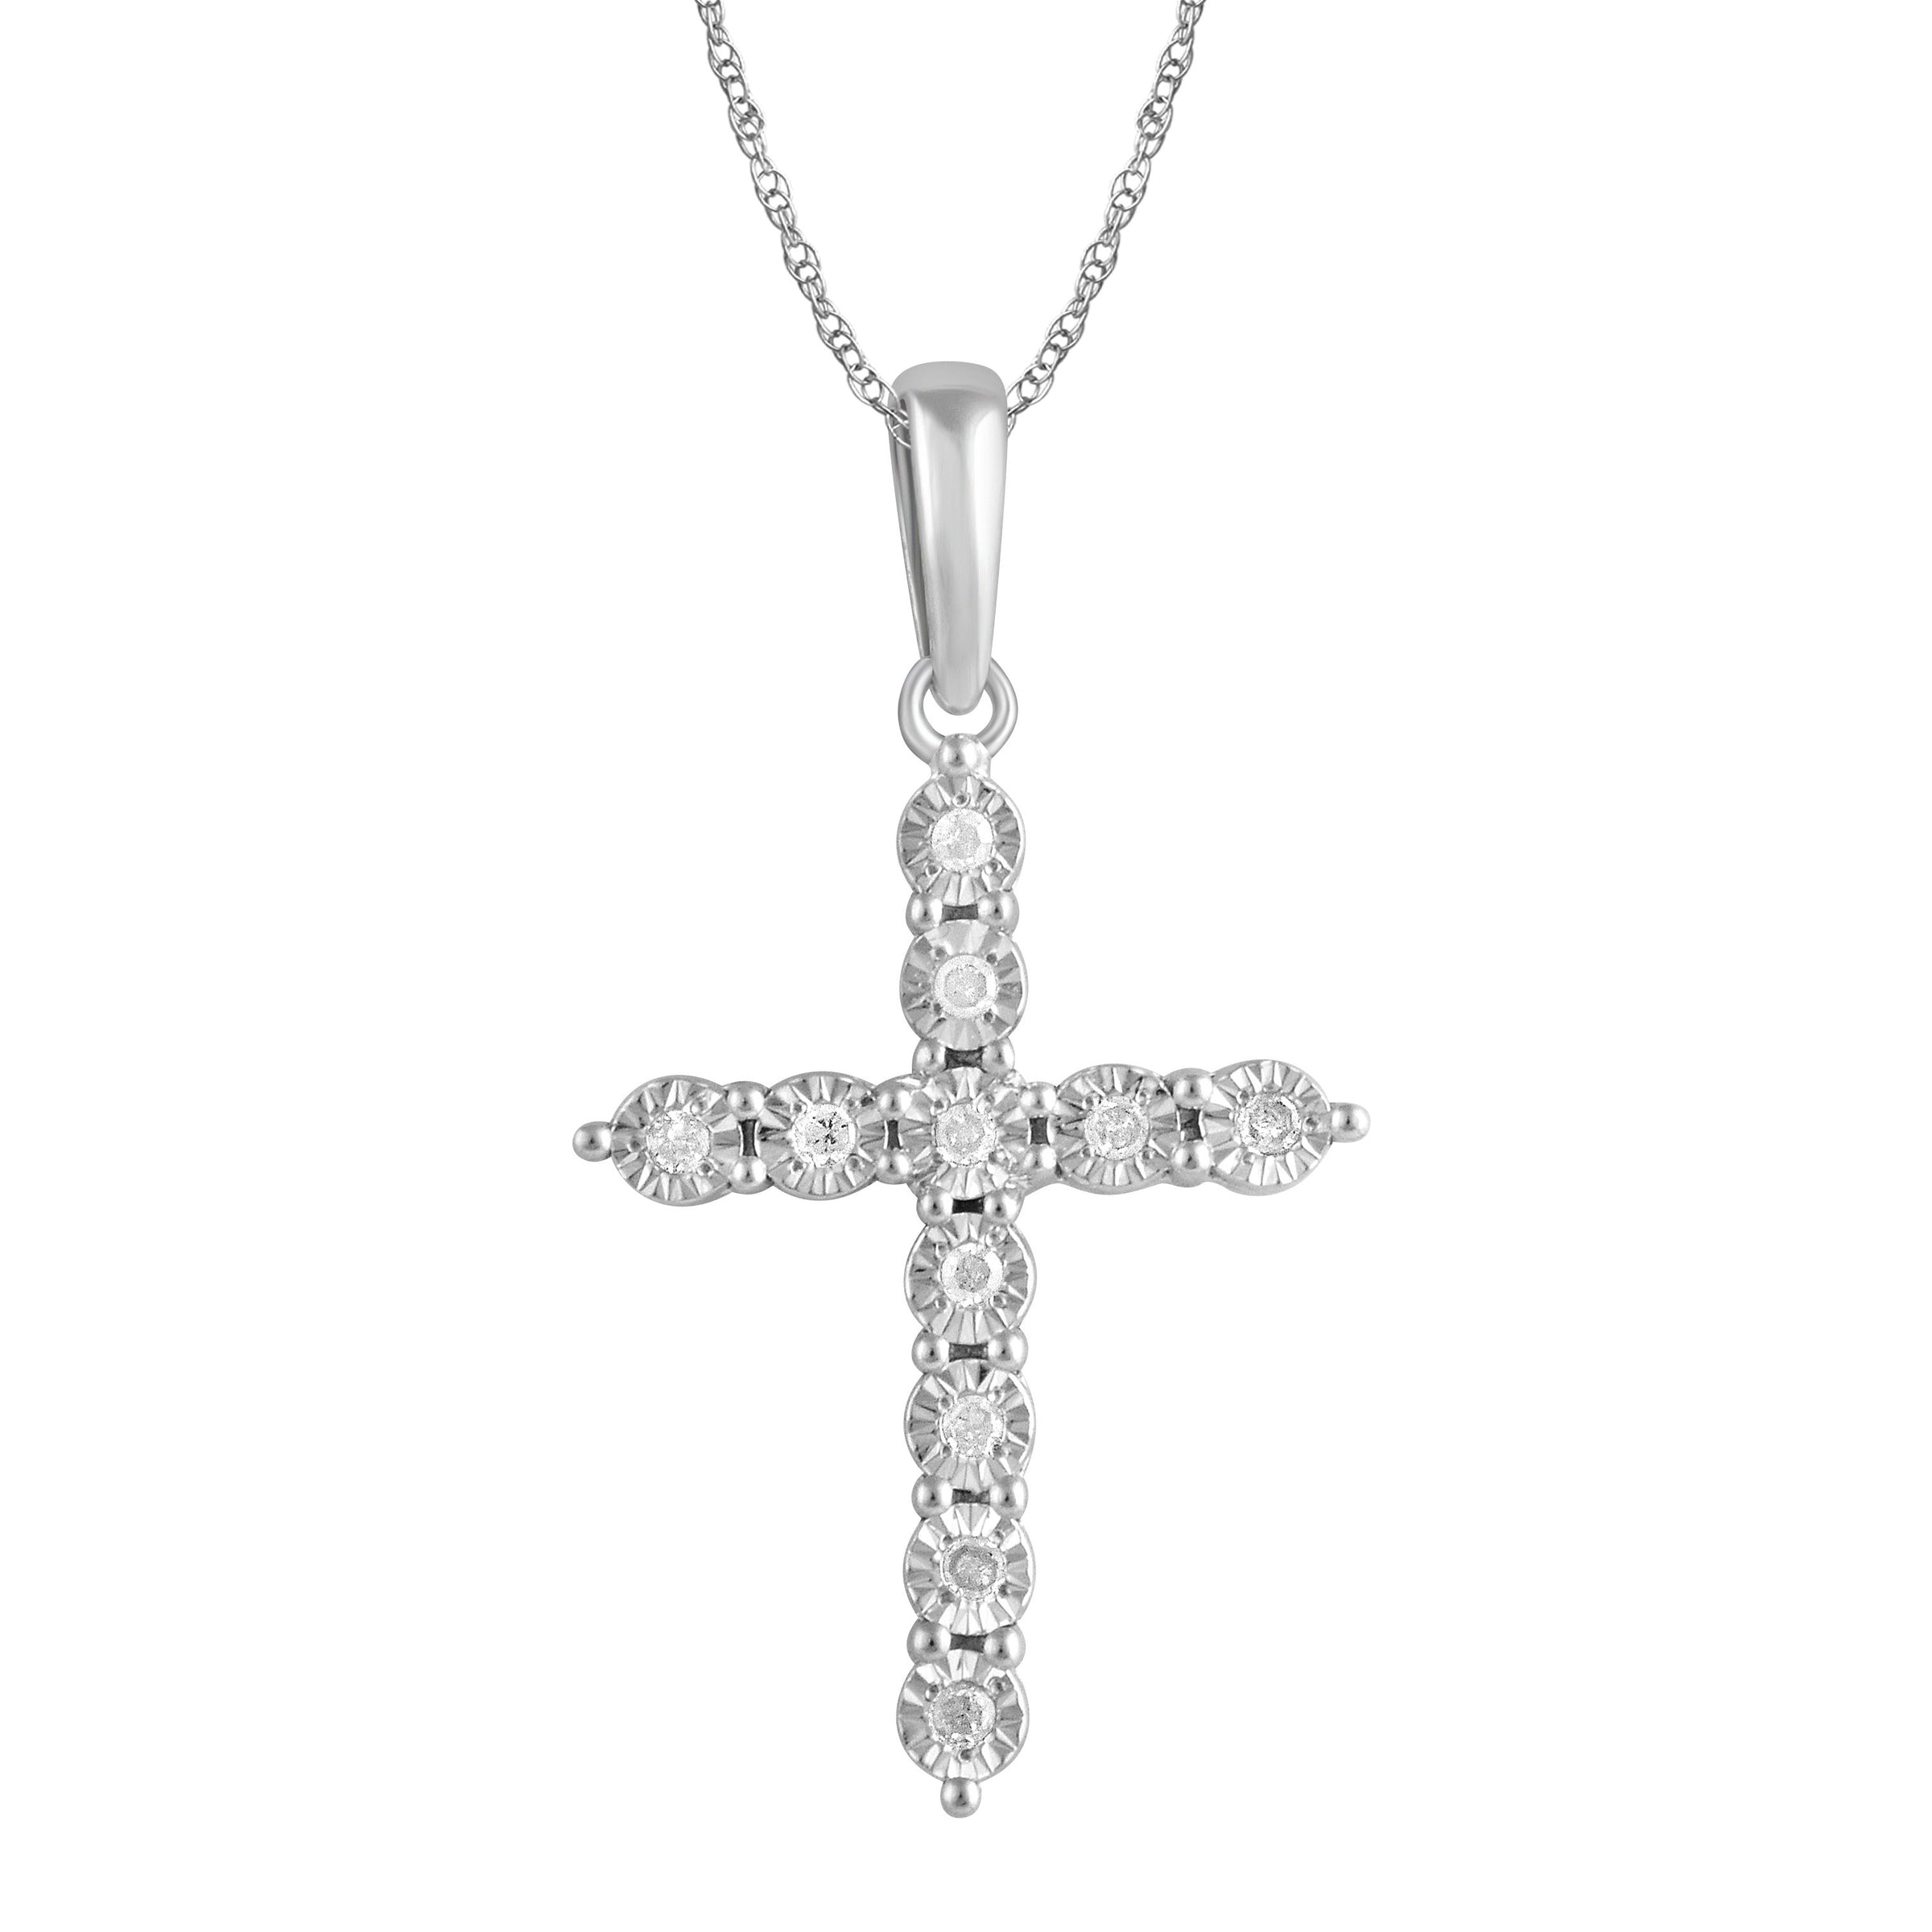 Diamond Set Cross Necklace in Sterling Silver Necklaces Bevilles 